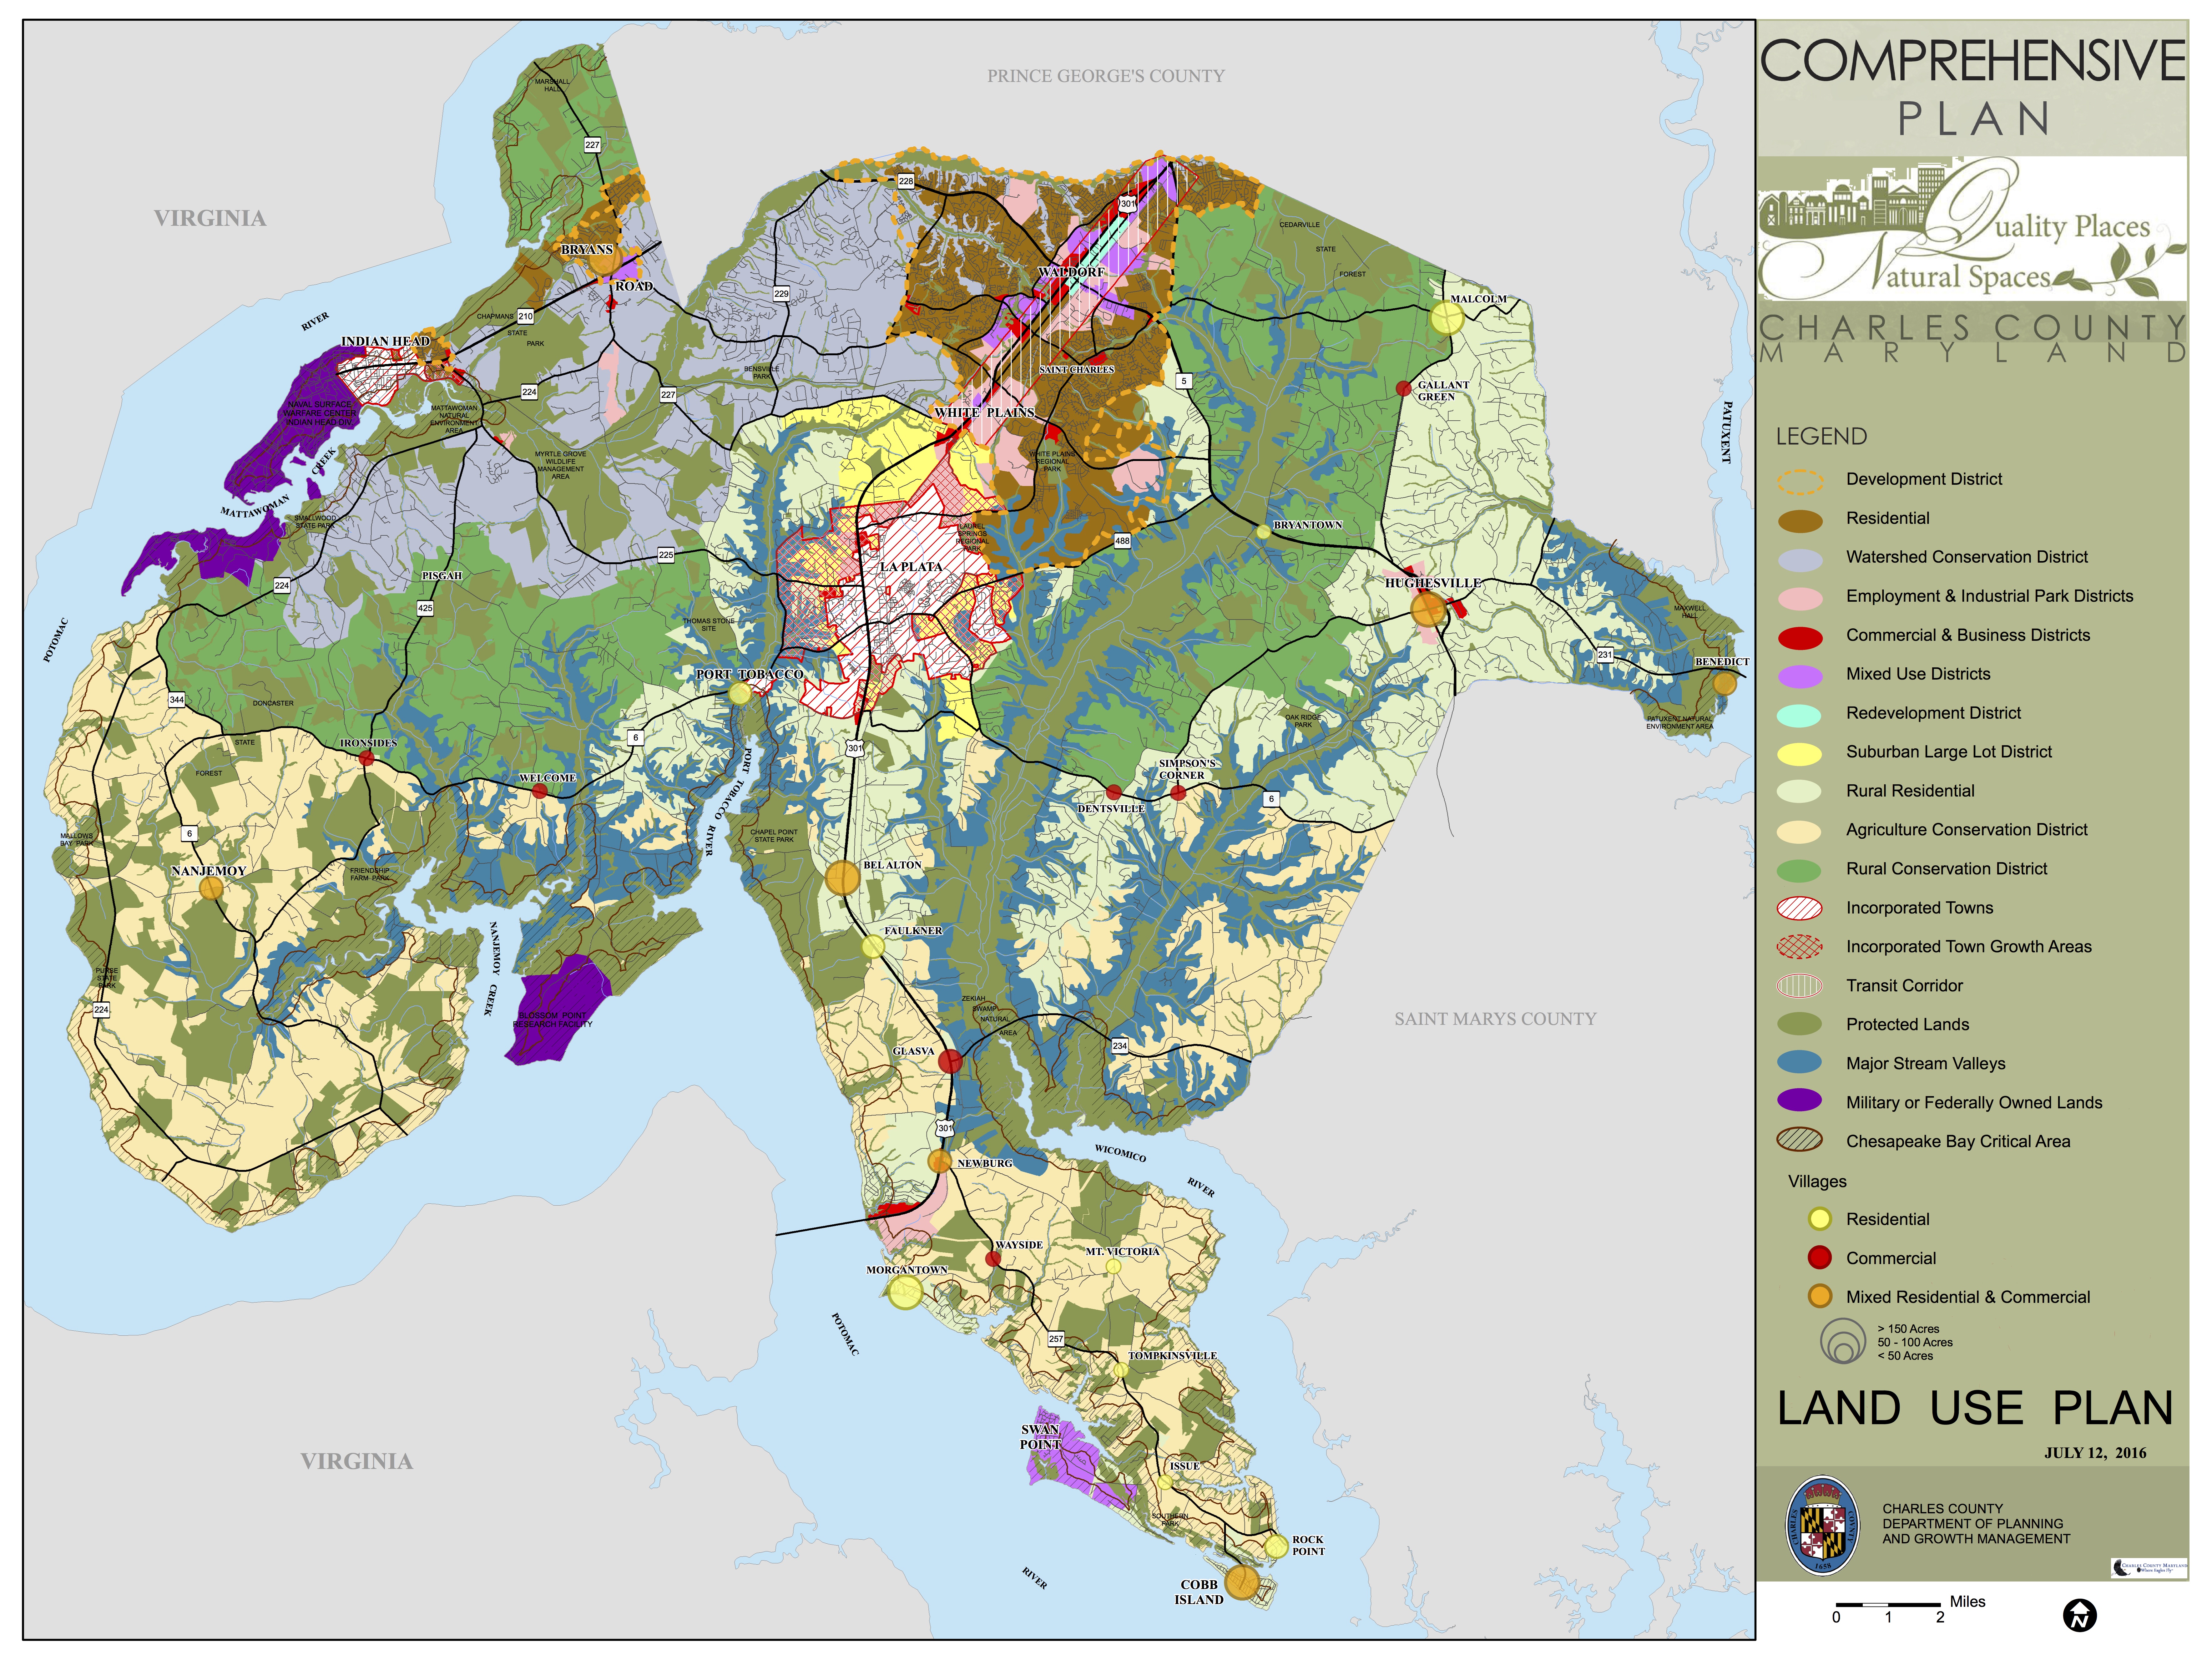 This map shows how land use is distributed throughout Charles County as a result of the comprehensive plan. The WCD is seen in the northern portion of the county.